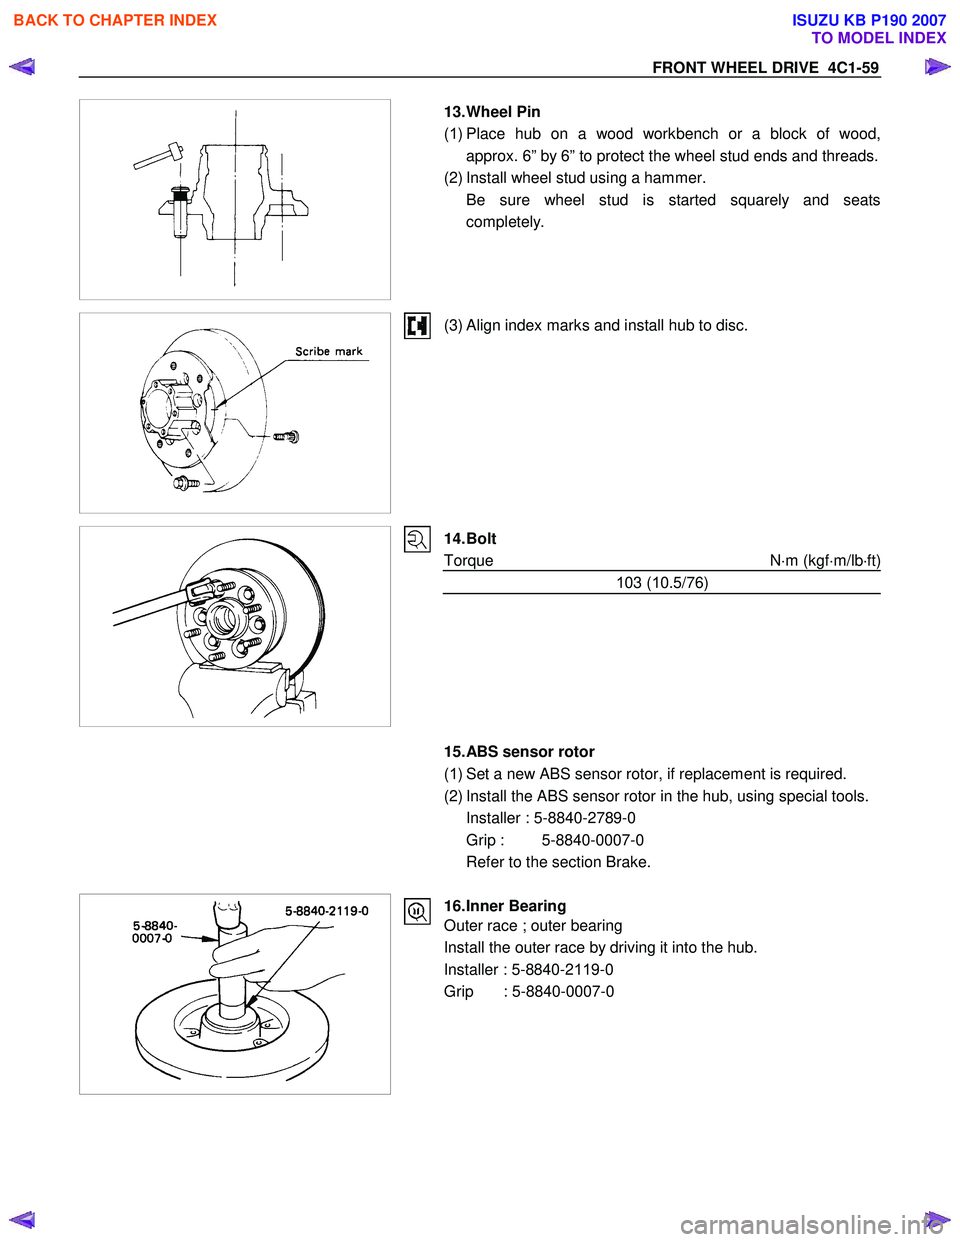 ISUZU KB P190 2007  Workshop User Guide FRONT WHEEL DRIVE  4C1-59 
 
 
 13. Wheel  Pin  
( 1 ) Place hub on a wood workbench or a block of wood,
approx. 6” by 6” to protect the wheel stud ends and threads.
(2) Install wheel stud using a